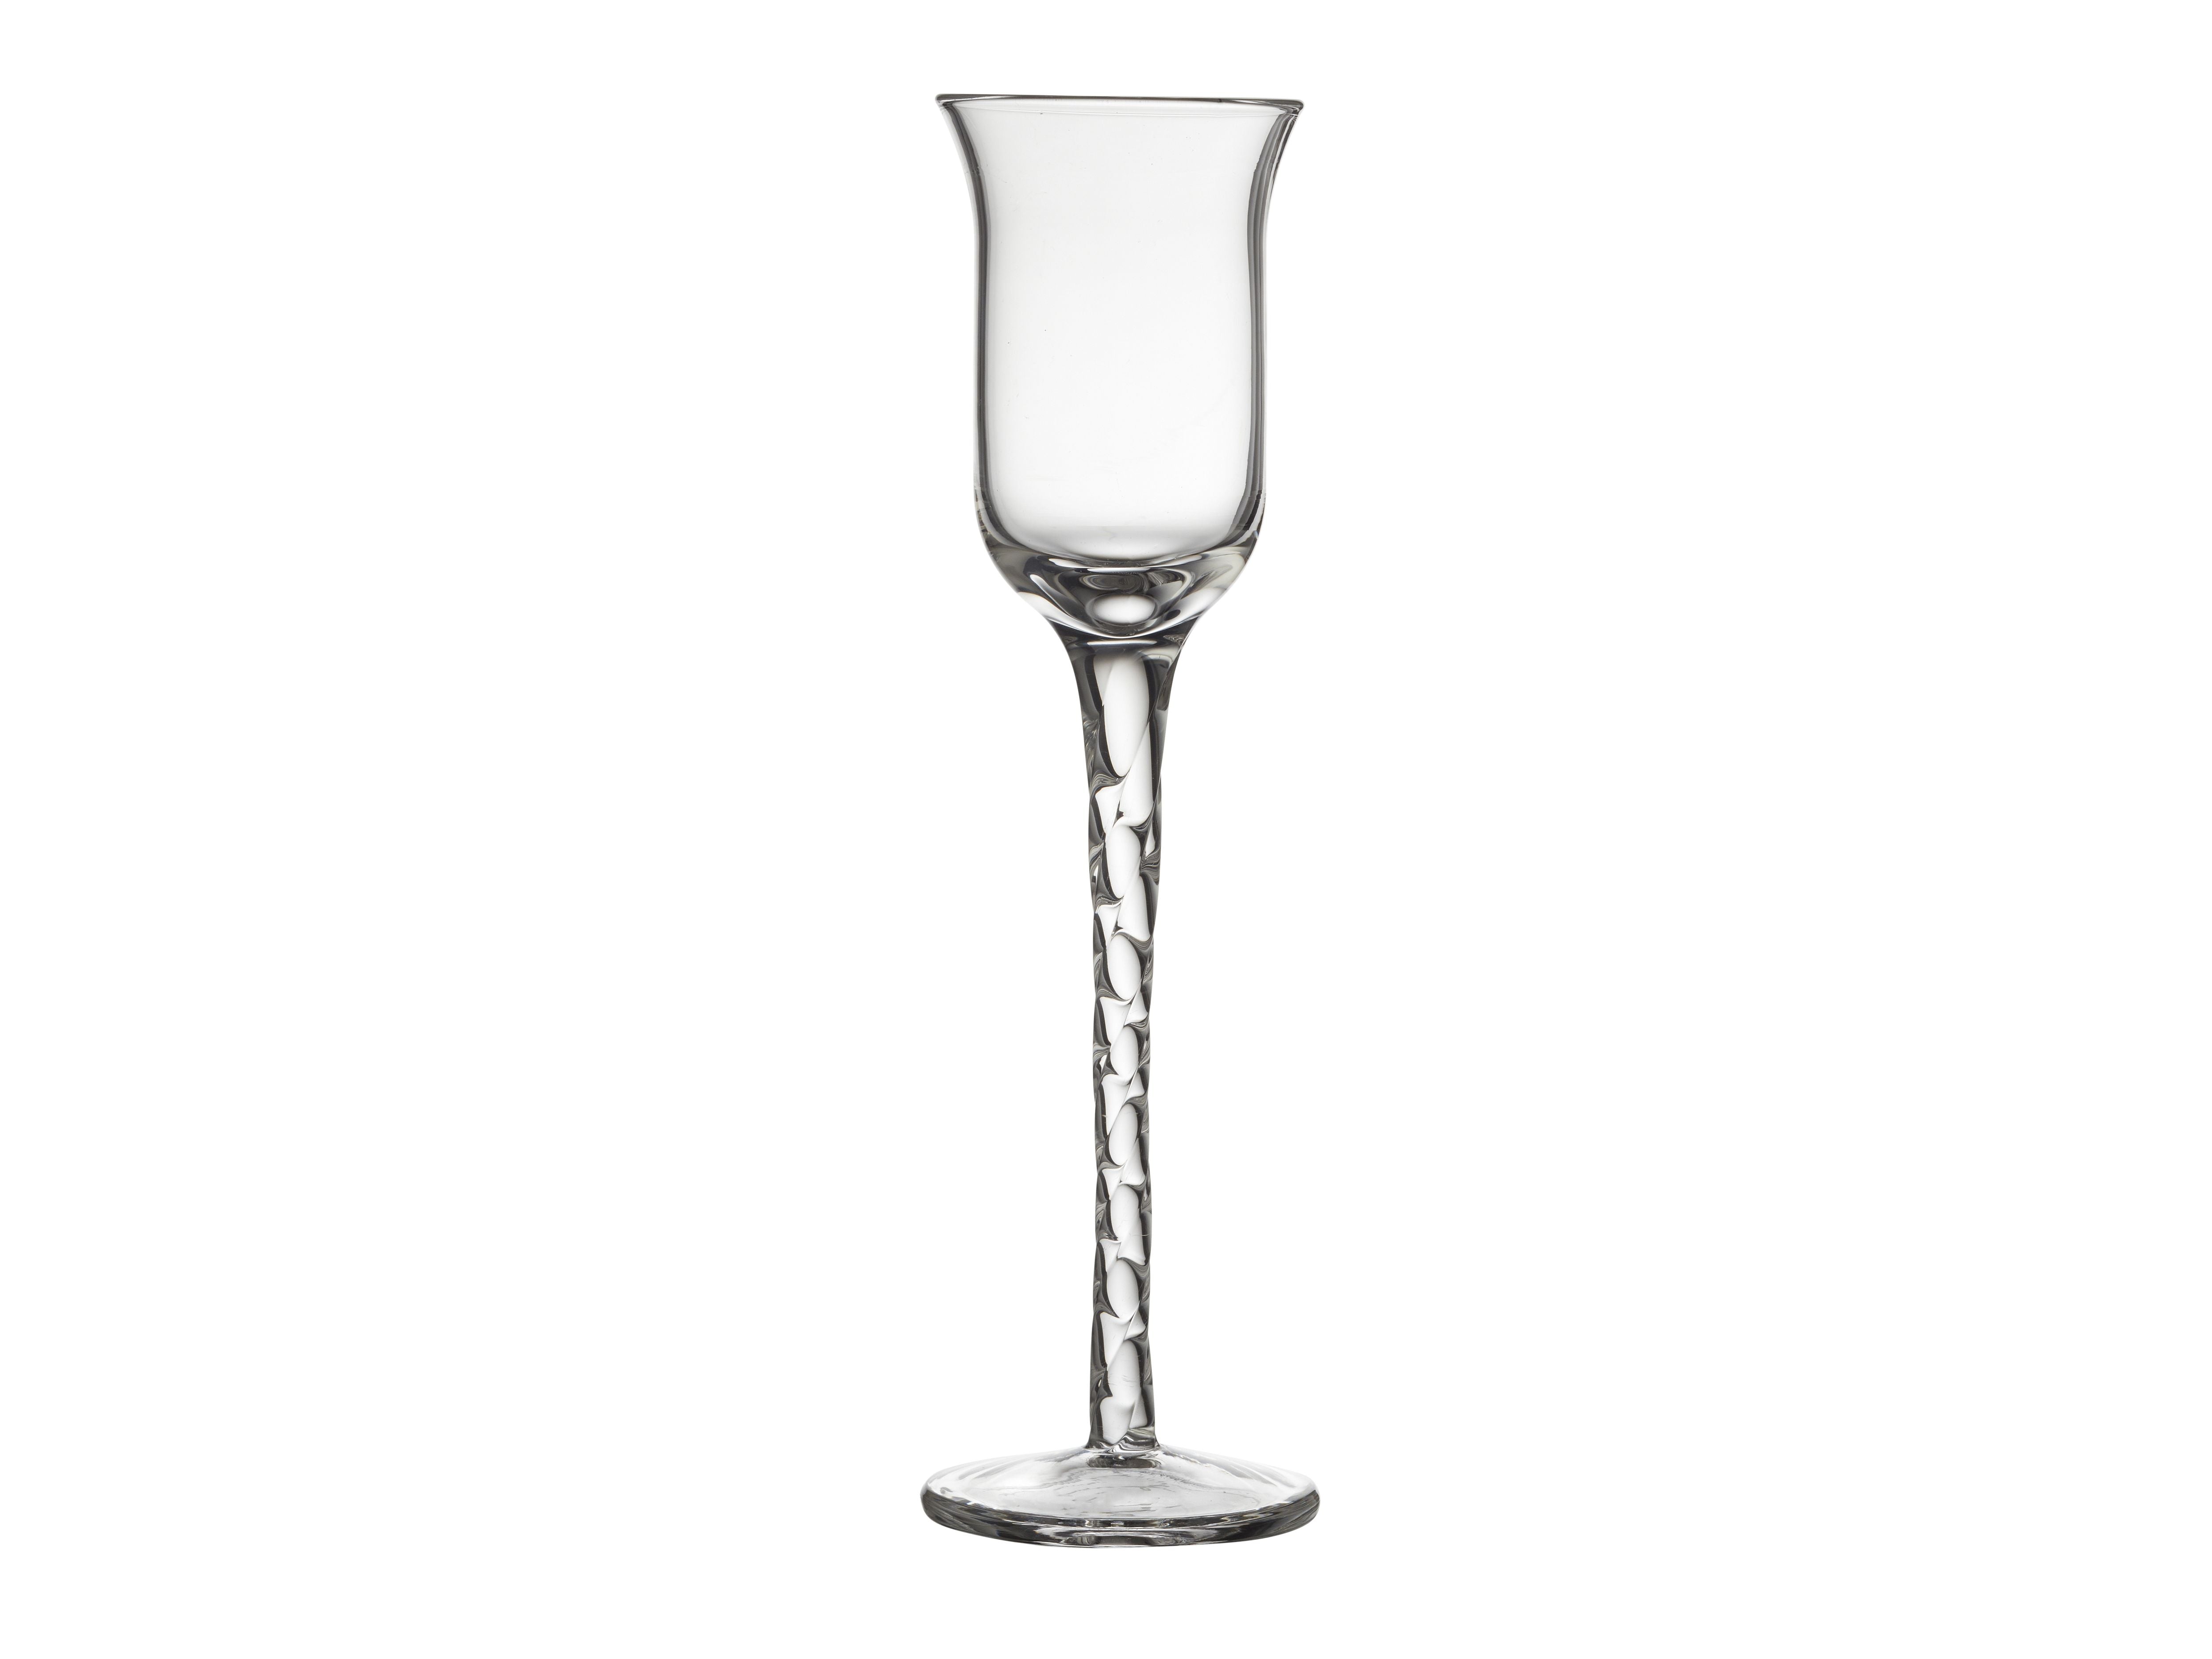 Lyngby Glas Rooma Snap Glass 18 cm 6 kpl. Perse.